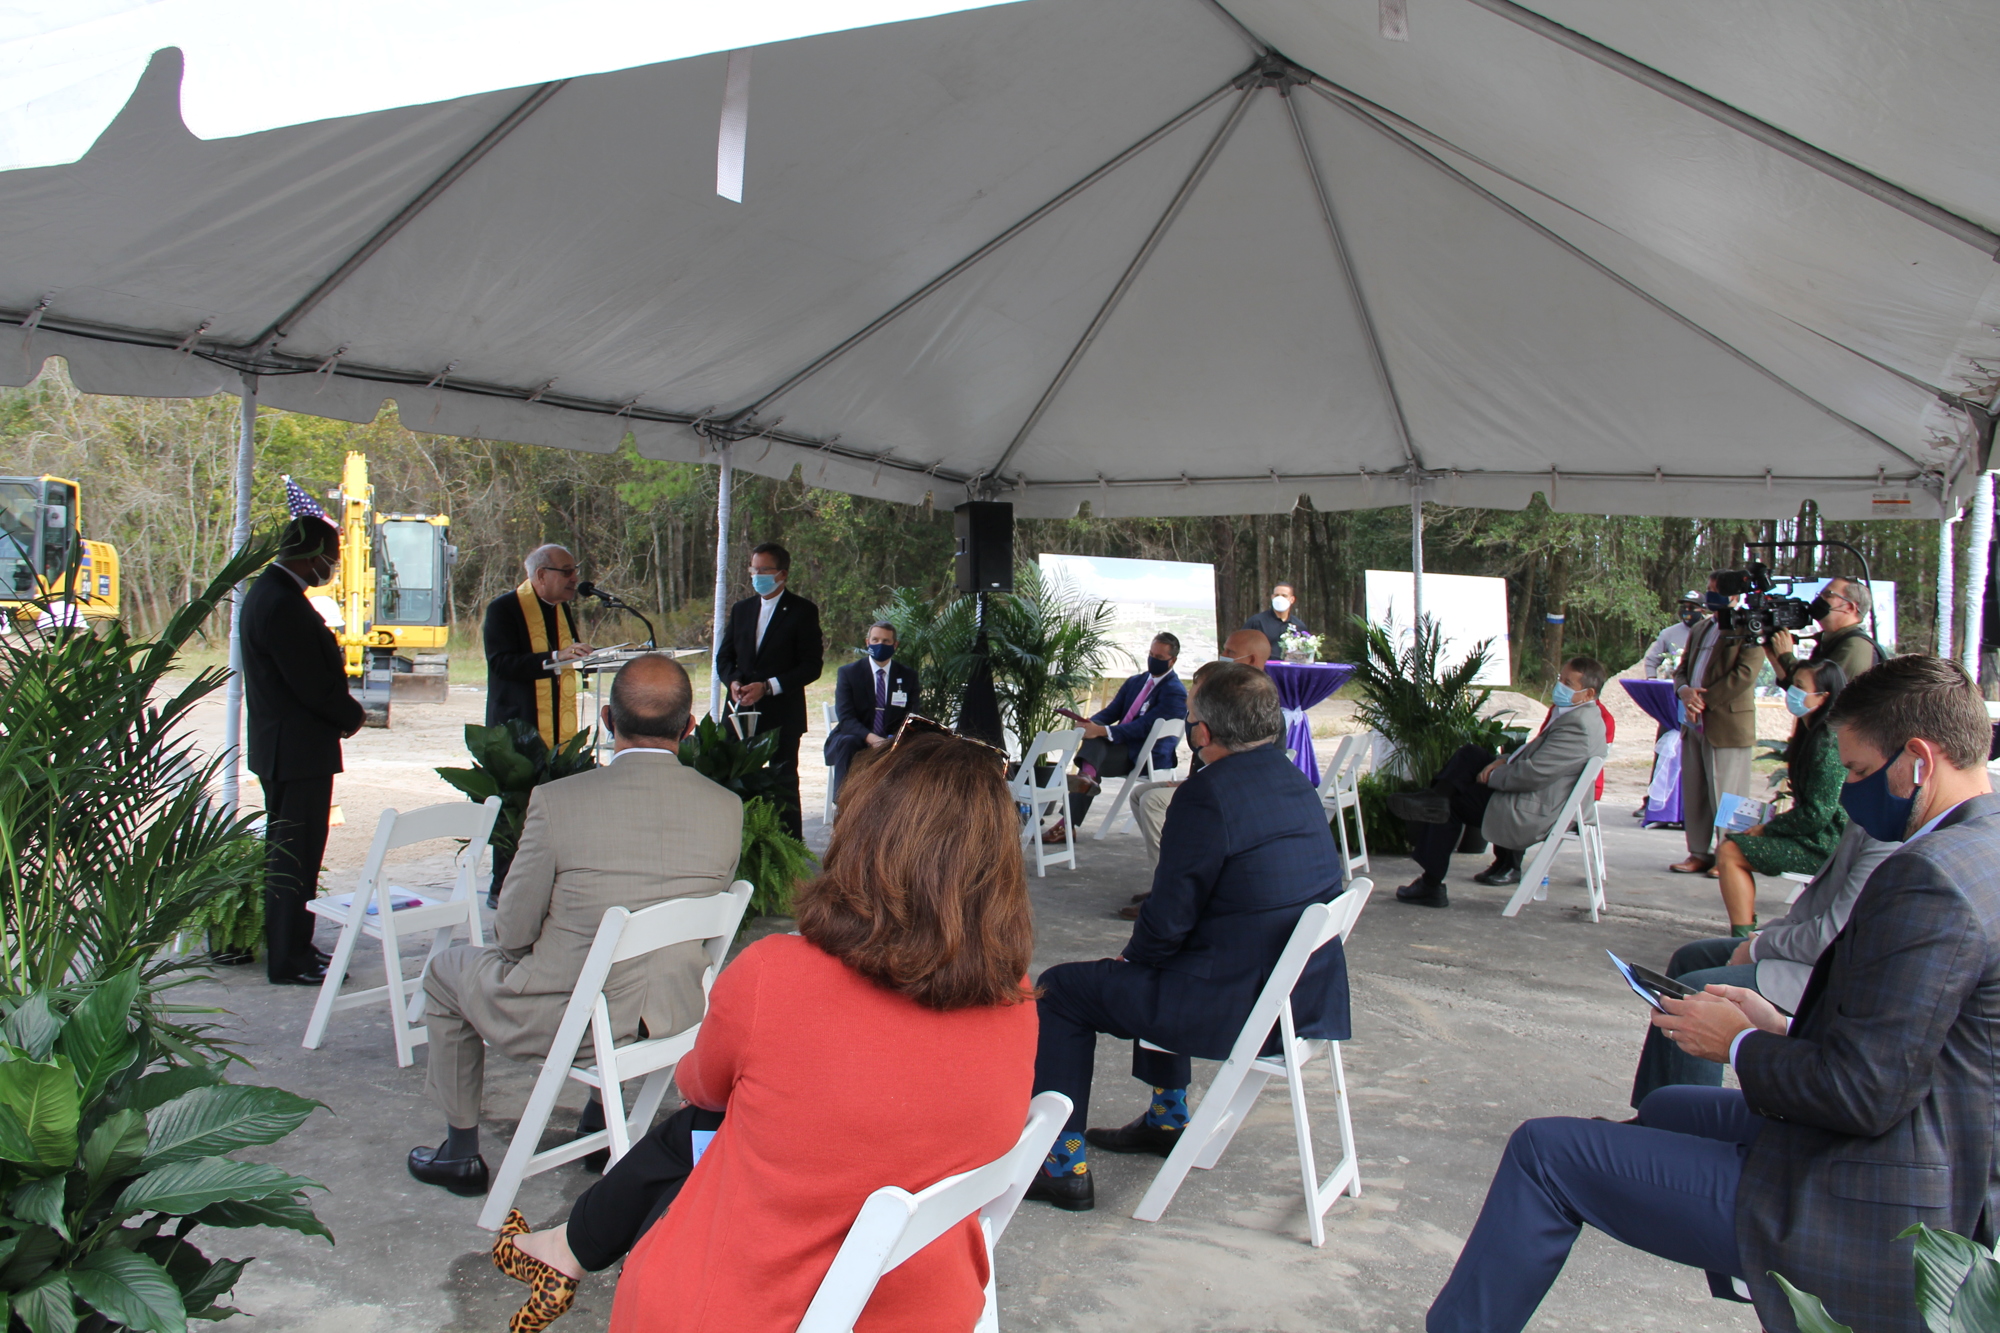 Ceremonies are held Dec. 4 for the  Ascension St. Vincent’s St. Johns County hospital groundbreaking.